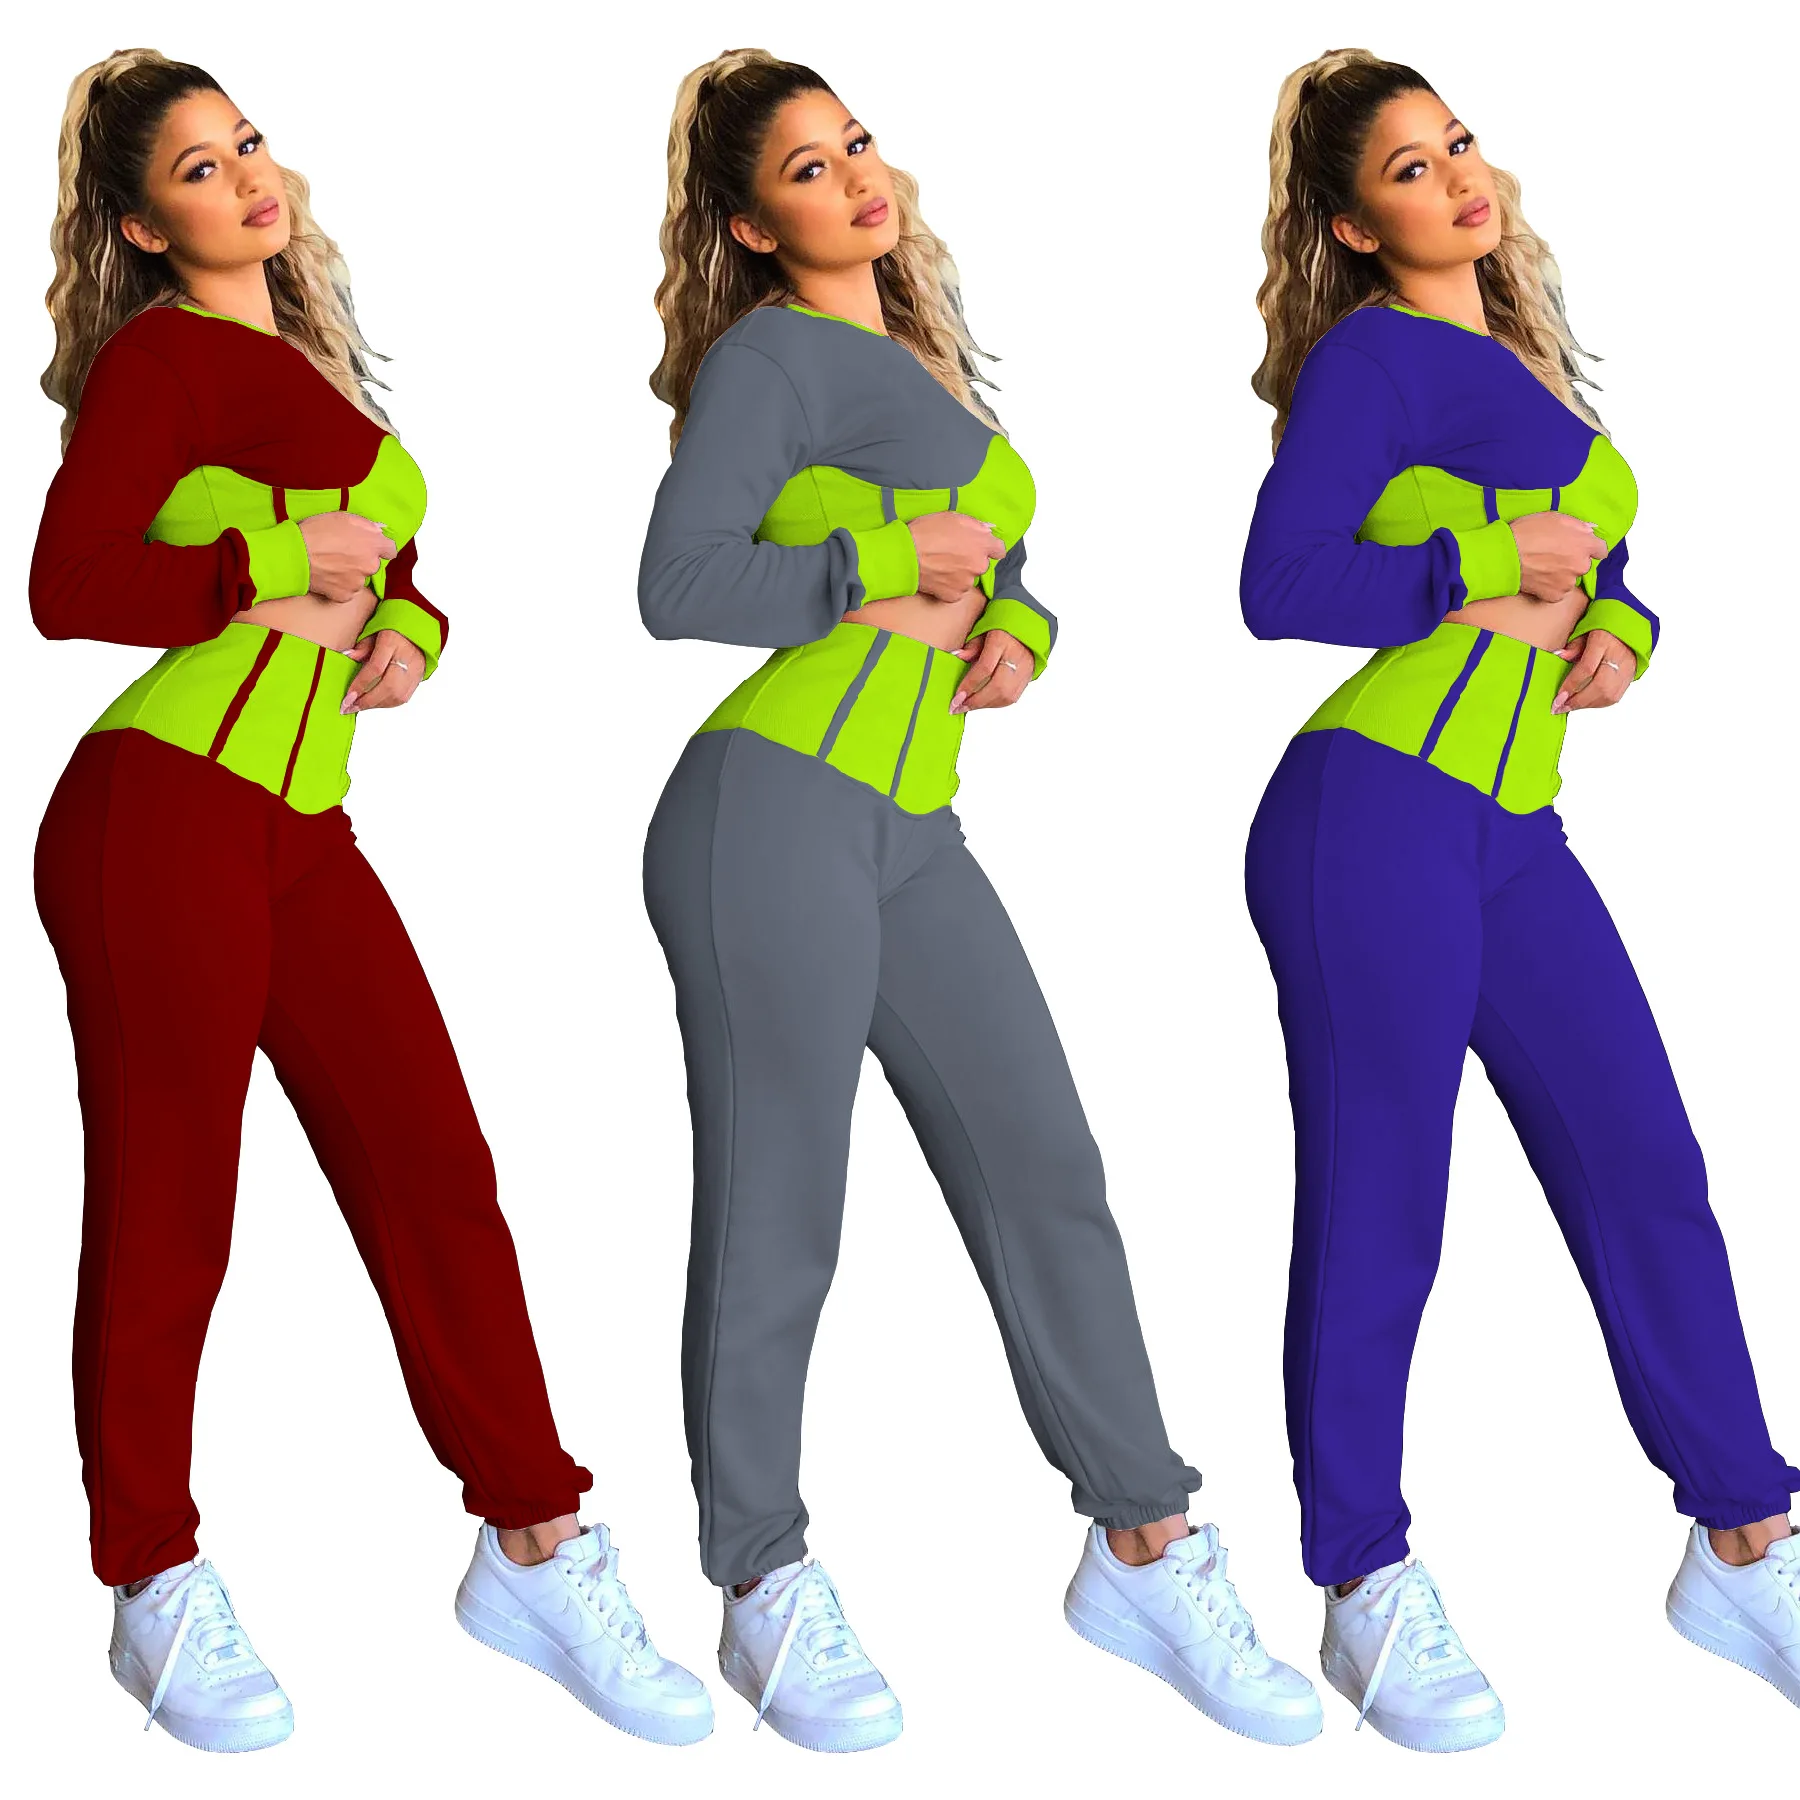 

WW-1352 Women's Rib Fabrics Of Double Stitching Color Binding Bodice Sweat Two Suits Lounge Wear Suits Set For Trendy Women, Customized color